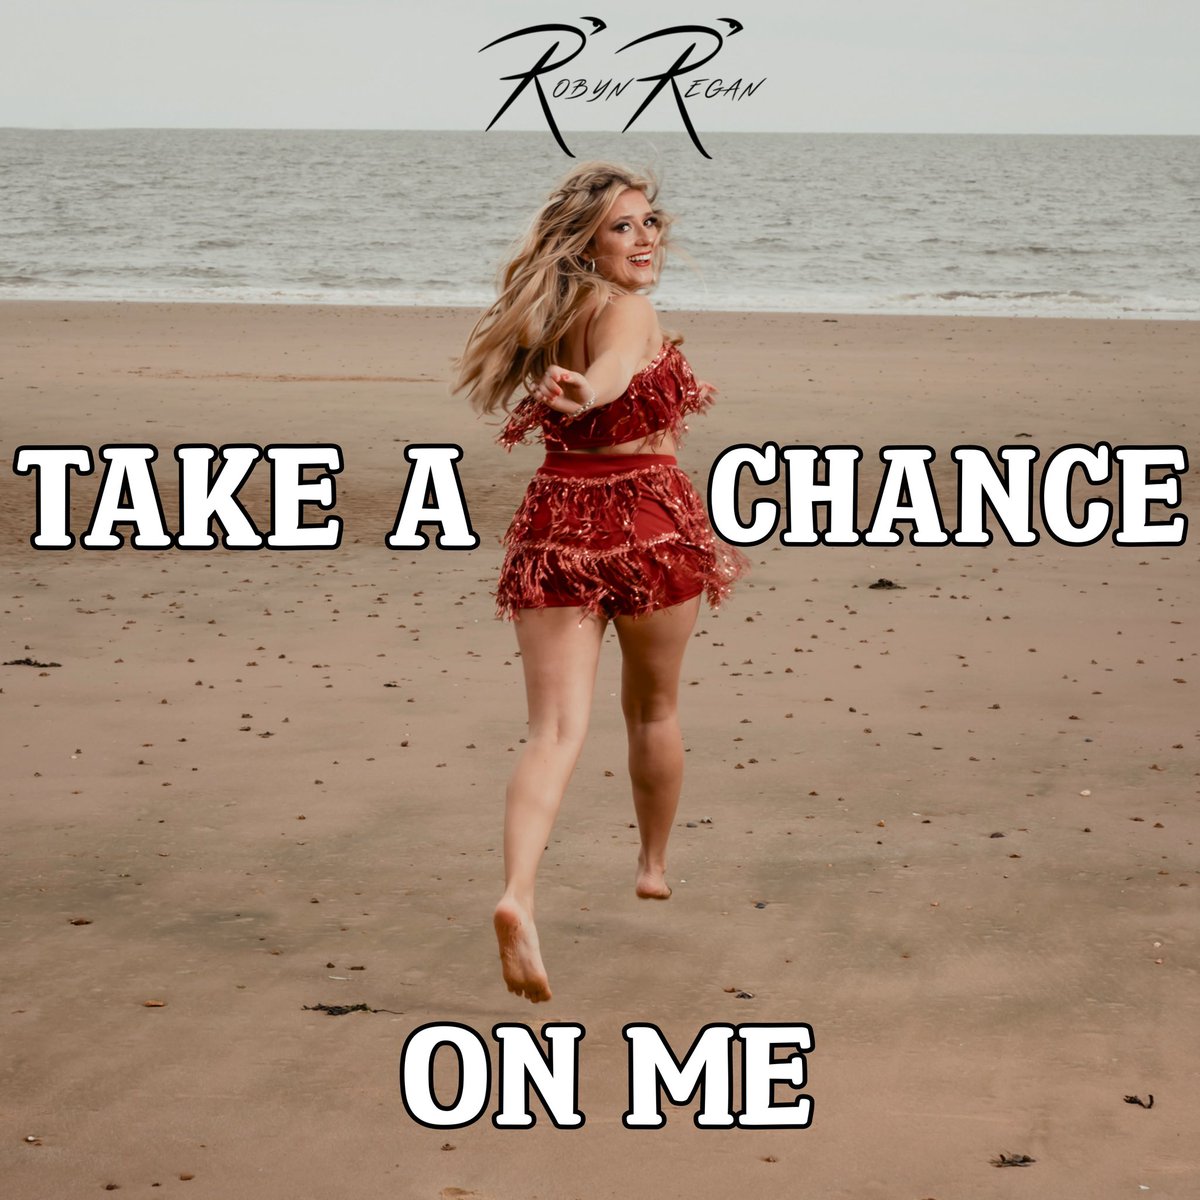 TAKE A CHANCE ON ME - EP IS OUT NOW! AVAILABLE ON ALL MUSIC PLATFORMS ditto.fm/robynregan-tak… PLEASE DOWNLOAD, ADD TO PLAYLISTS, STREAM ON REPEAT, SHARE TO EVERYONE YOU KNOW! AS AN INDEPENDENT ARTIST YOUR SUPPORT MEANS EVERYTHING 🥺 Help me make my dreams come true ✨🥺❤️